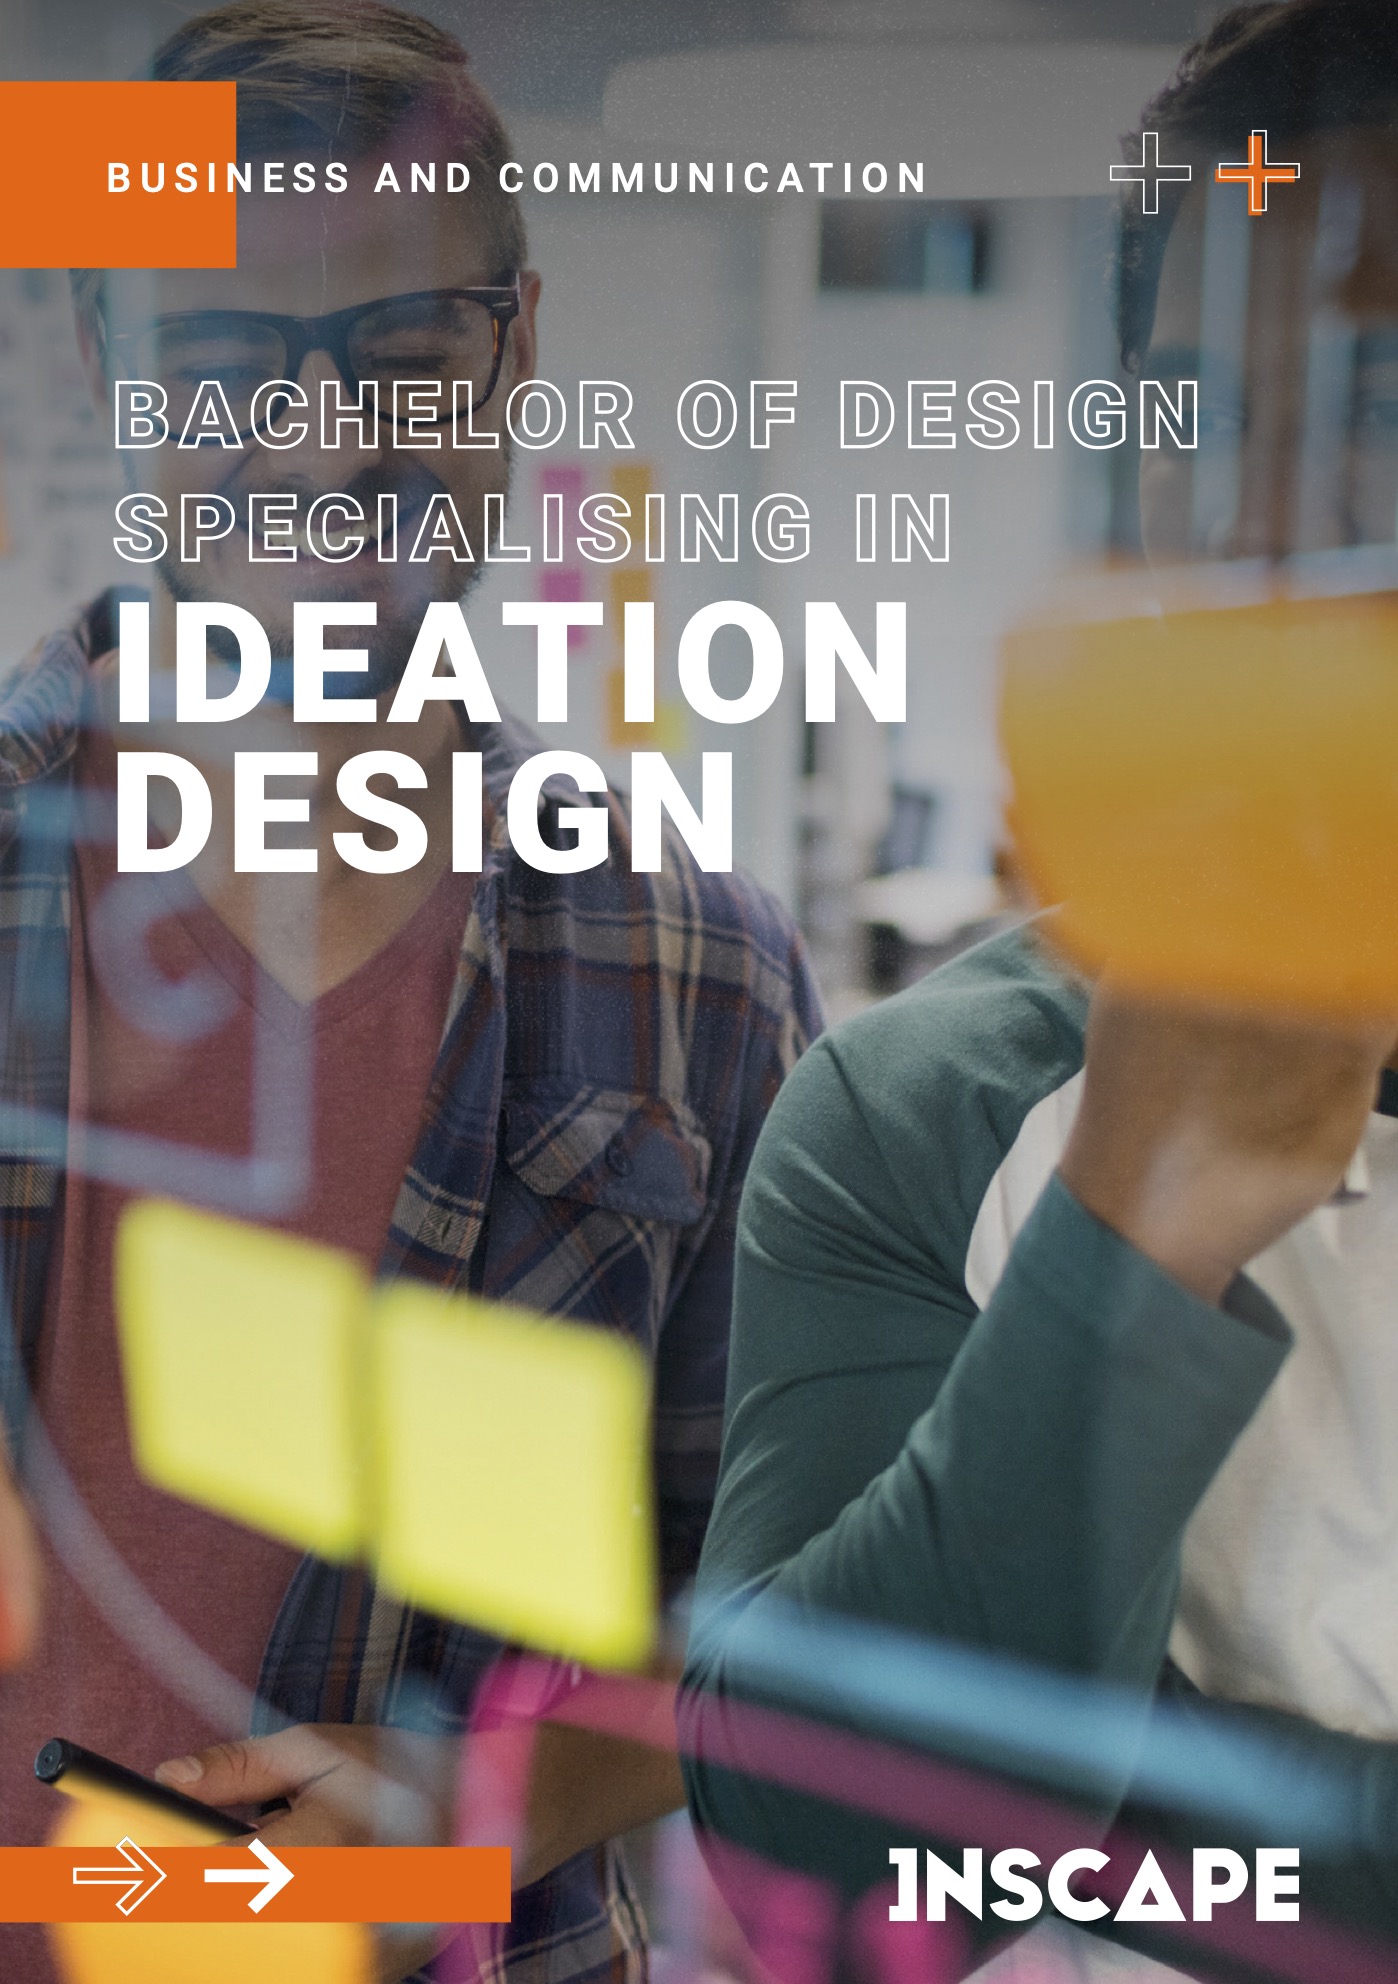 Bachelor of Design specialising in Ideation Design